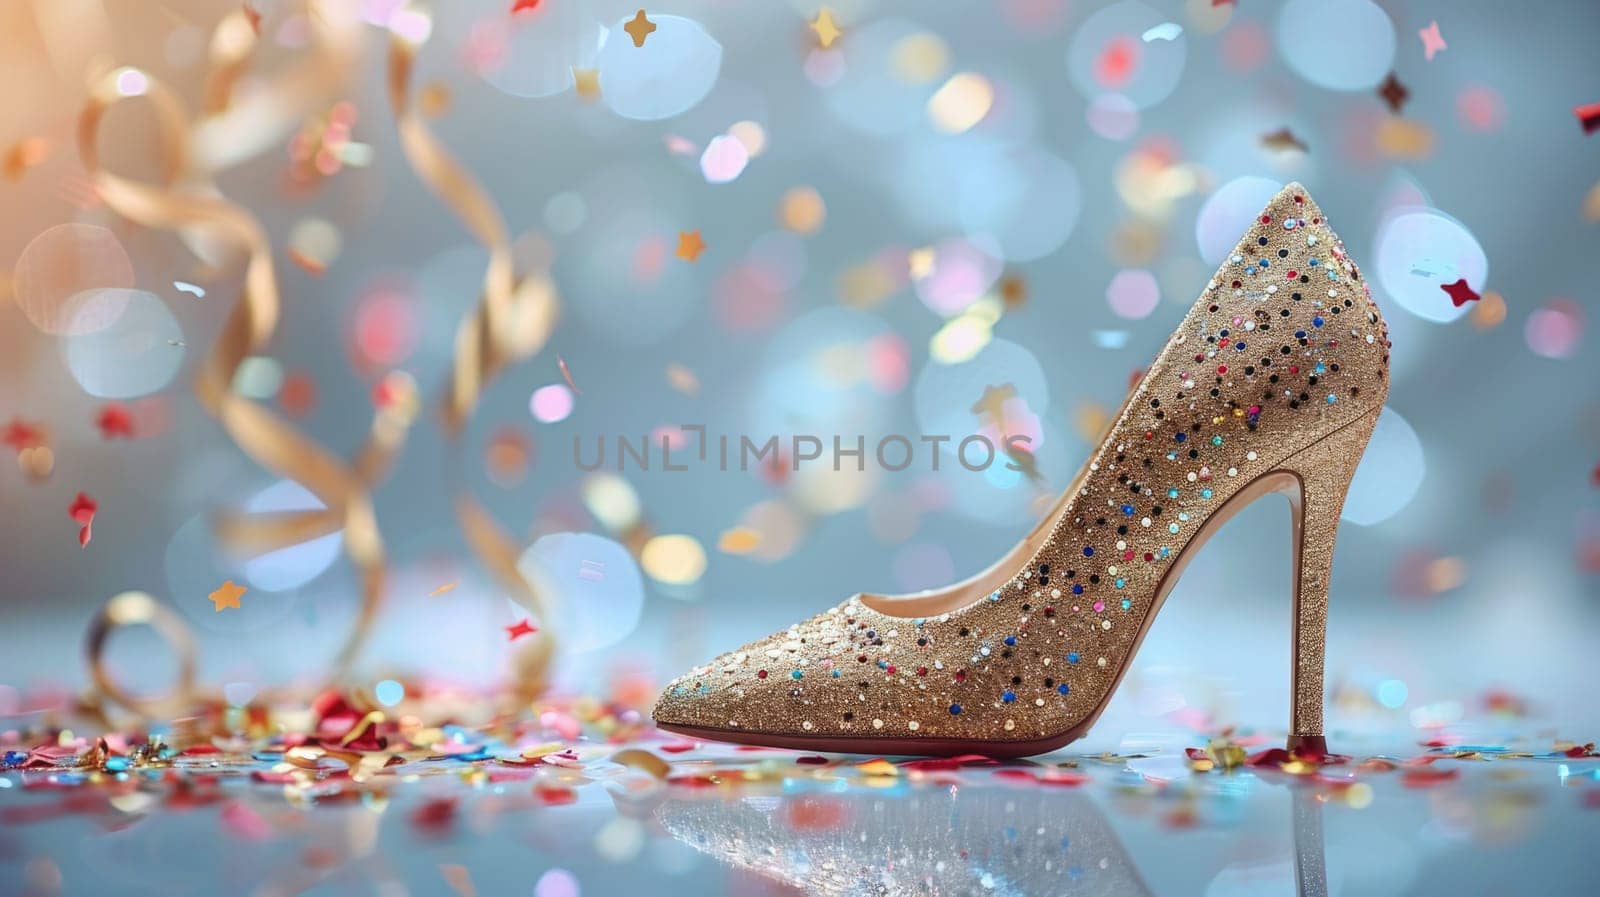 A photo of a pair of elegant golden high heeled shoes placed neatly on top of a table.